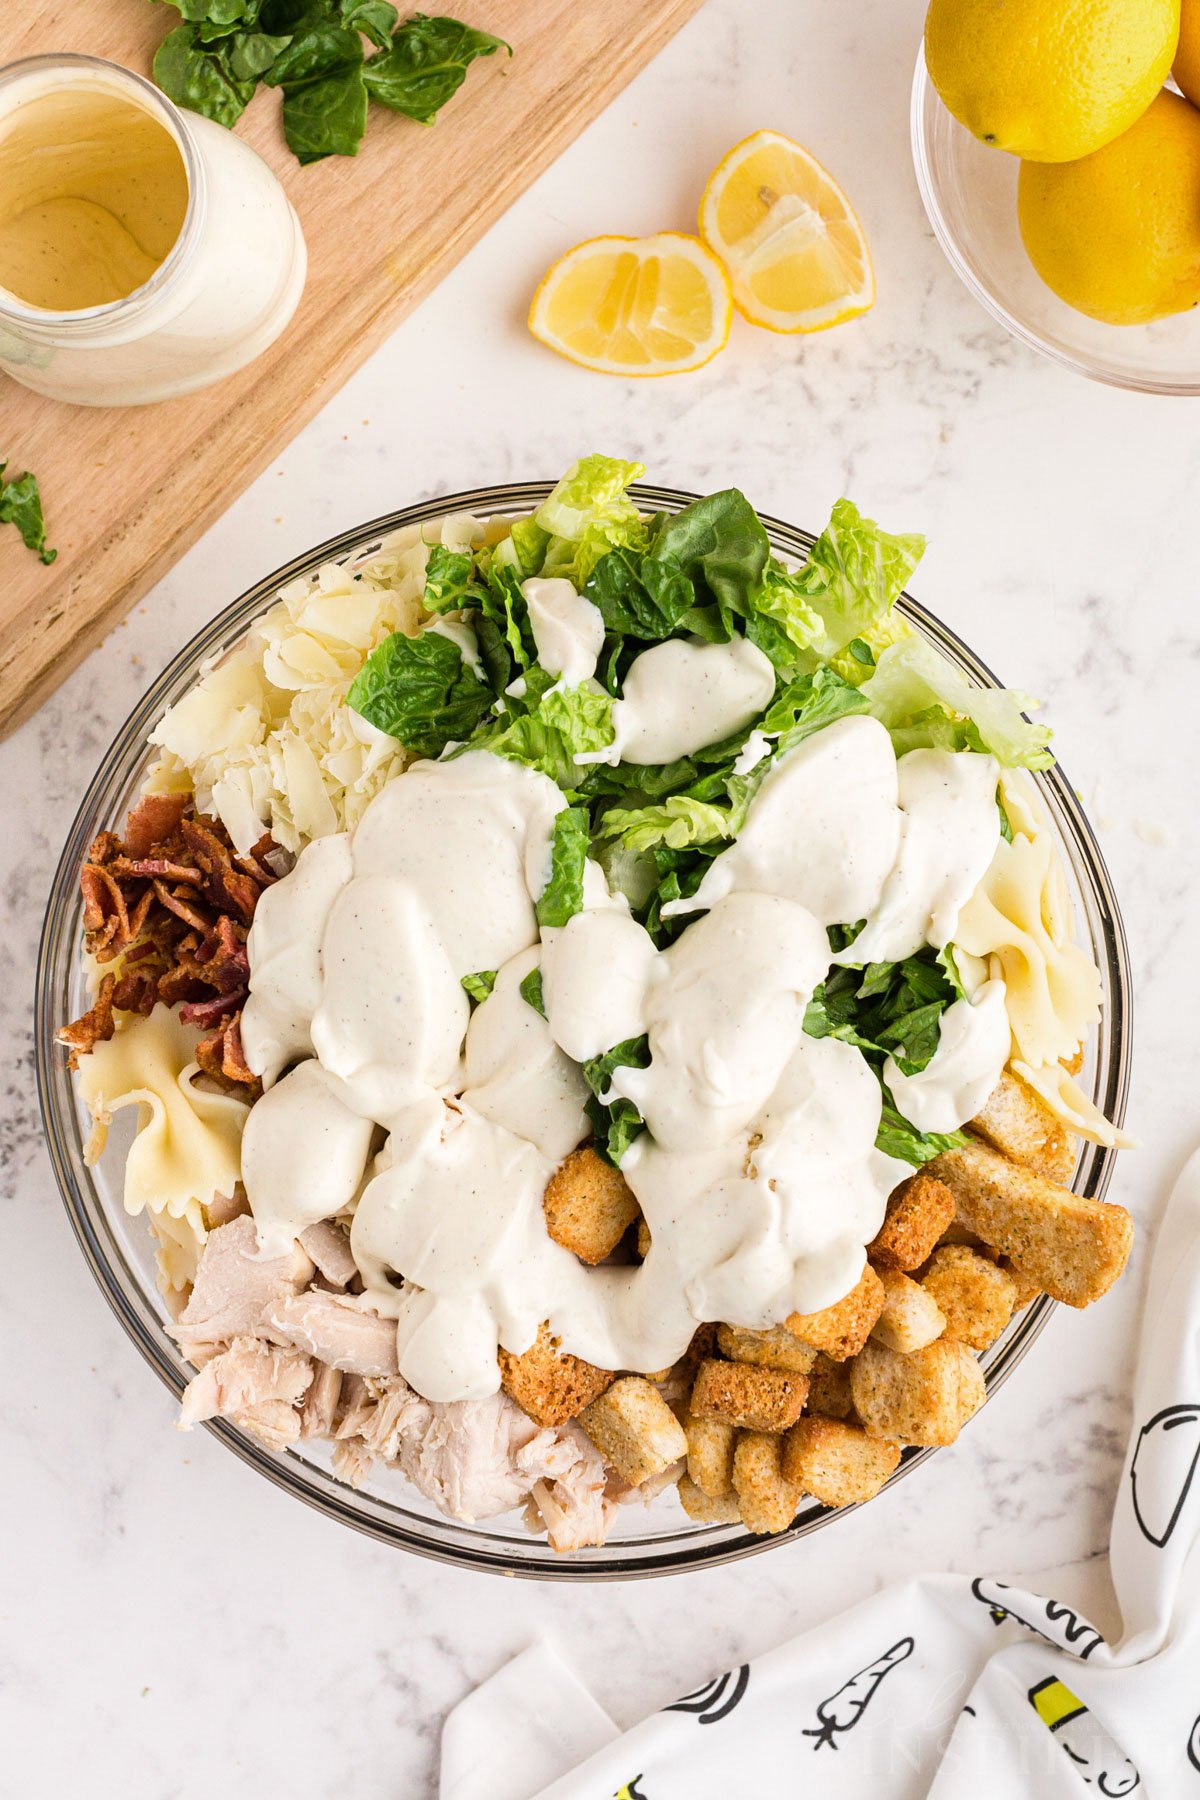 Caesar salad ingredients all added to a large glass bowl, placed on top of a white marble surface with excess salad ingredients scattered around.